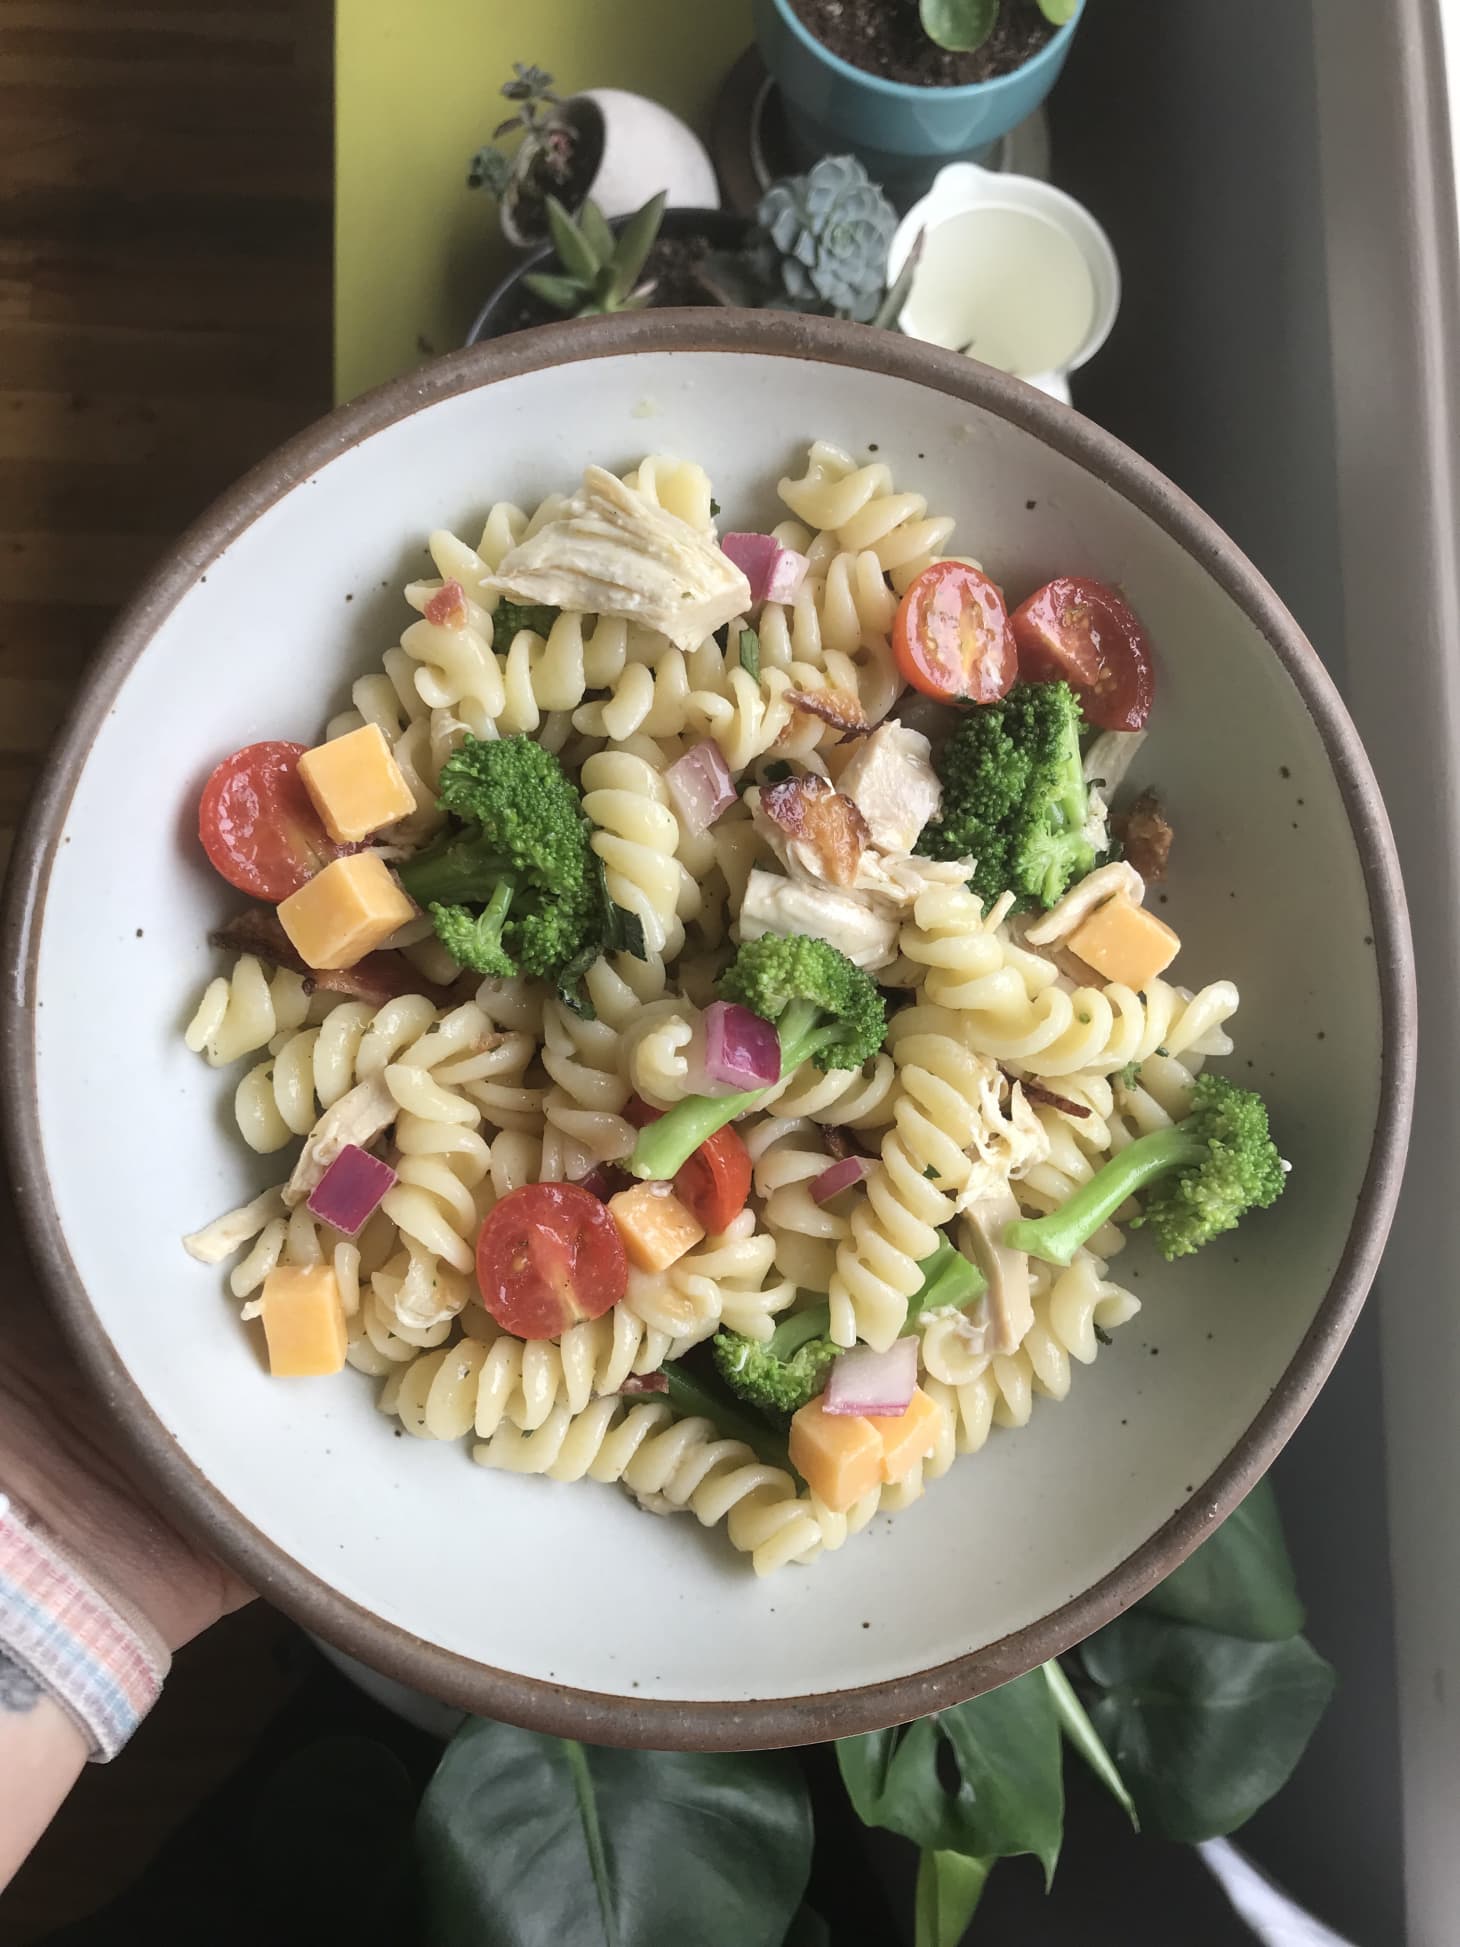 One Year Later, I'm Still Making This Pasta Salad Weekly ...